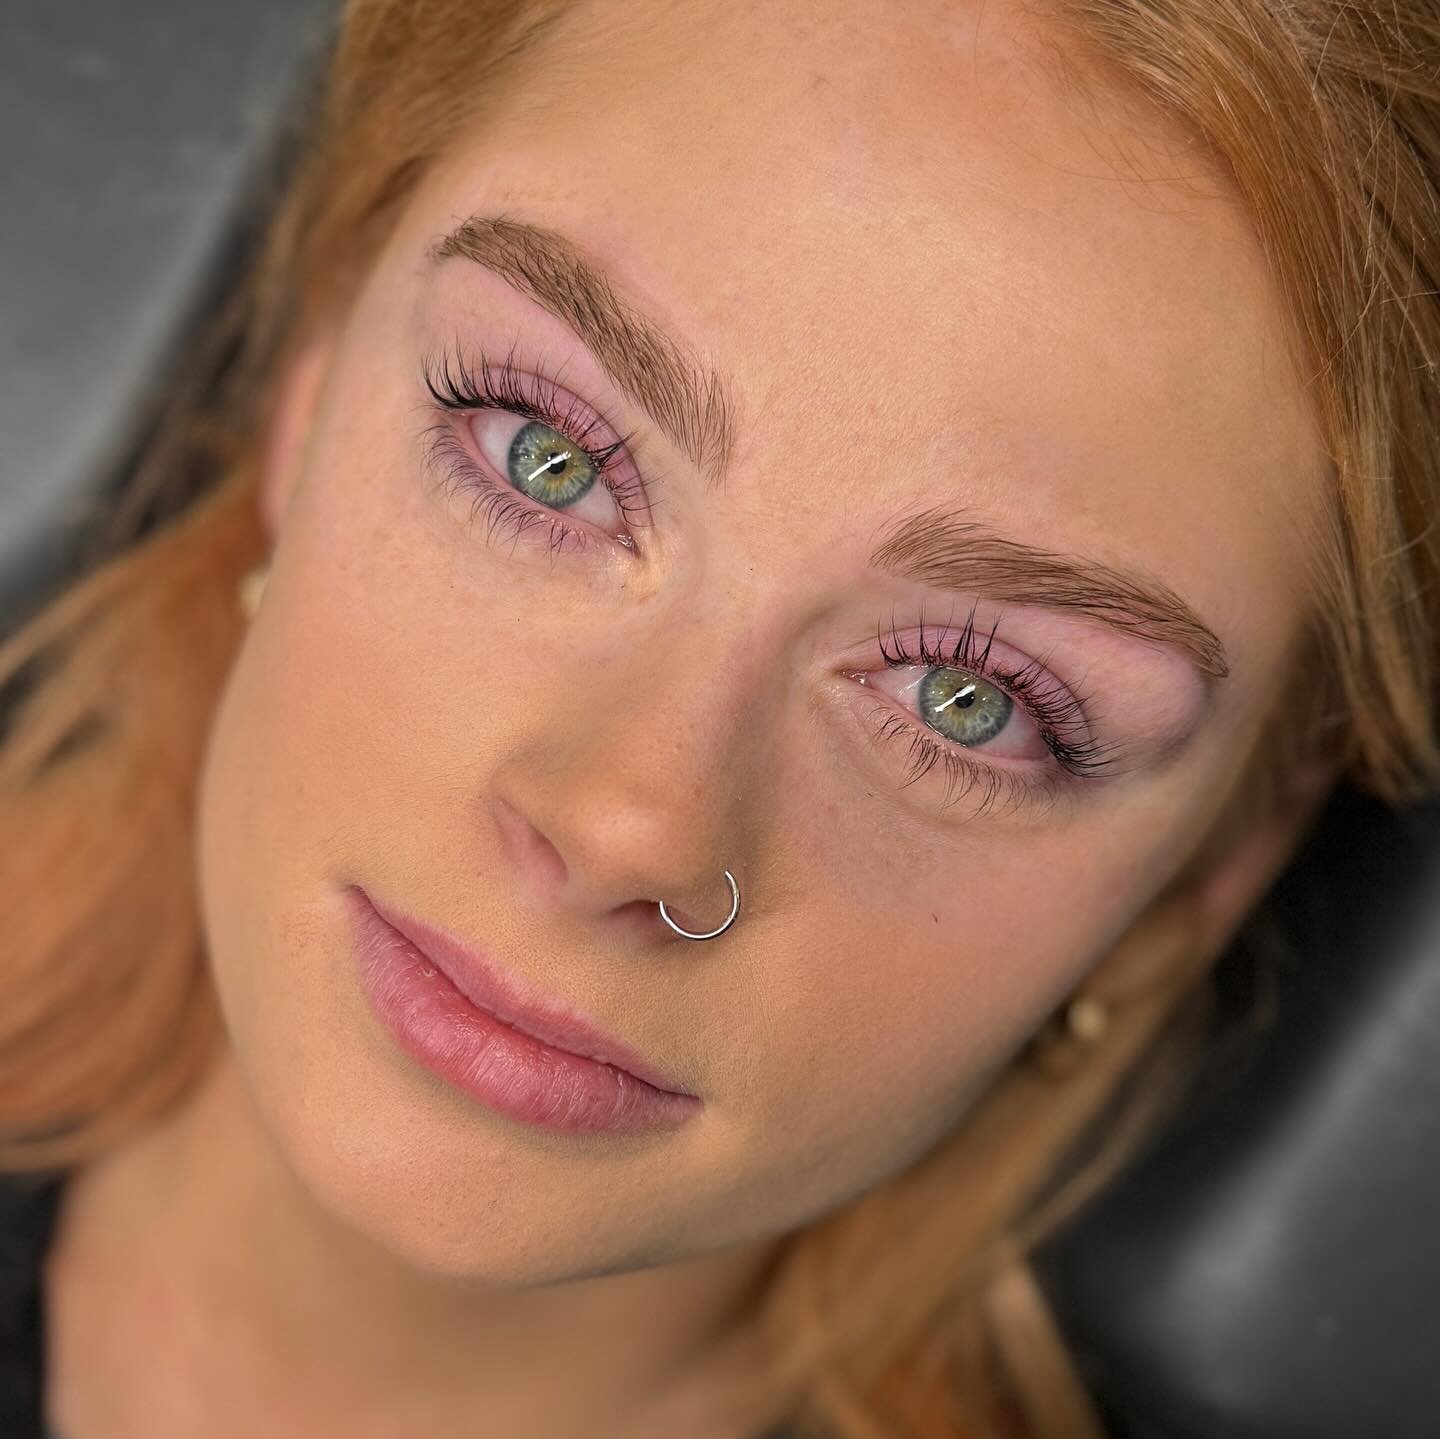 Seriously a work of art&mdash; Swipe for the before &amp; after 

This beautiful lash lift and tint and brows was created by Ashley✨

We currently have 40% off lash lifts &amp; tints with ash ending may 31st 

www.unrealartistry.com.au